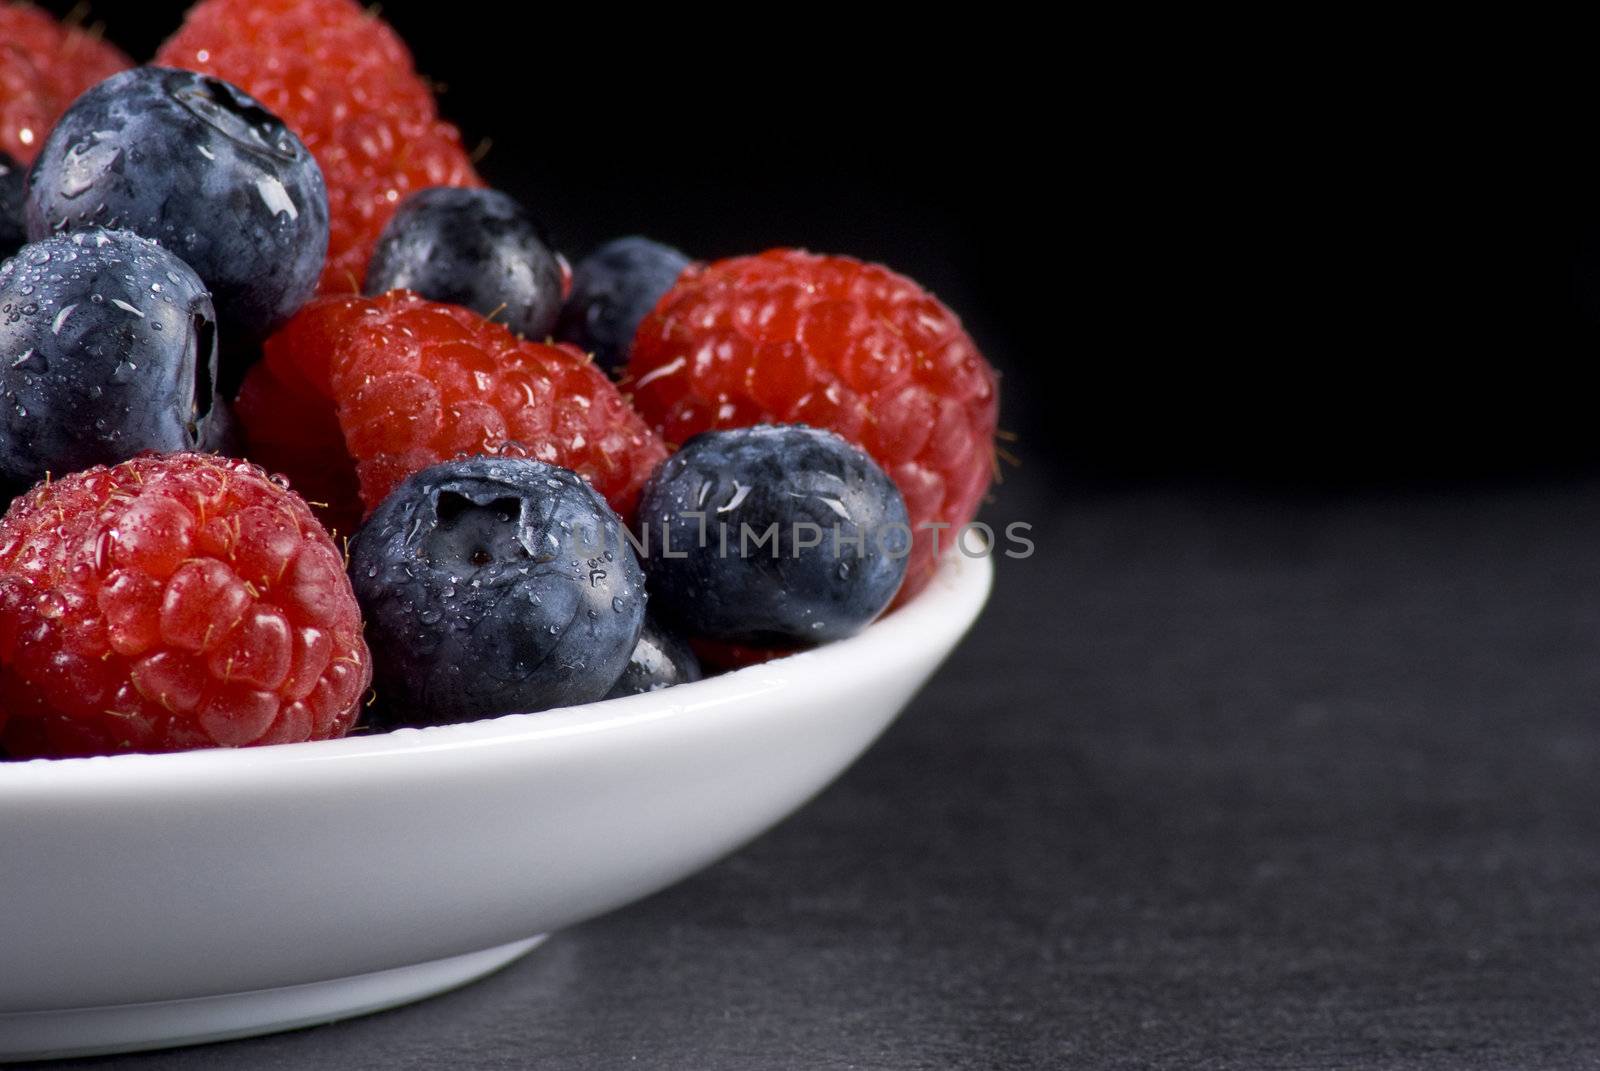 Plate of fresh blueberries and raspberries on balck background